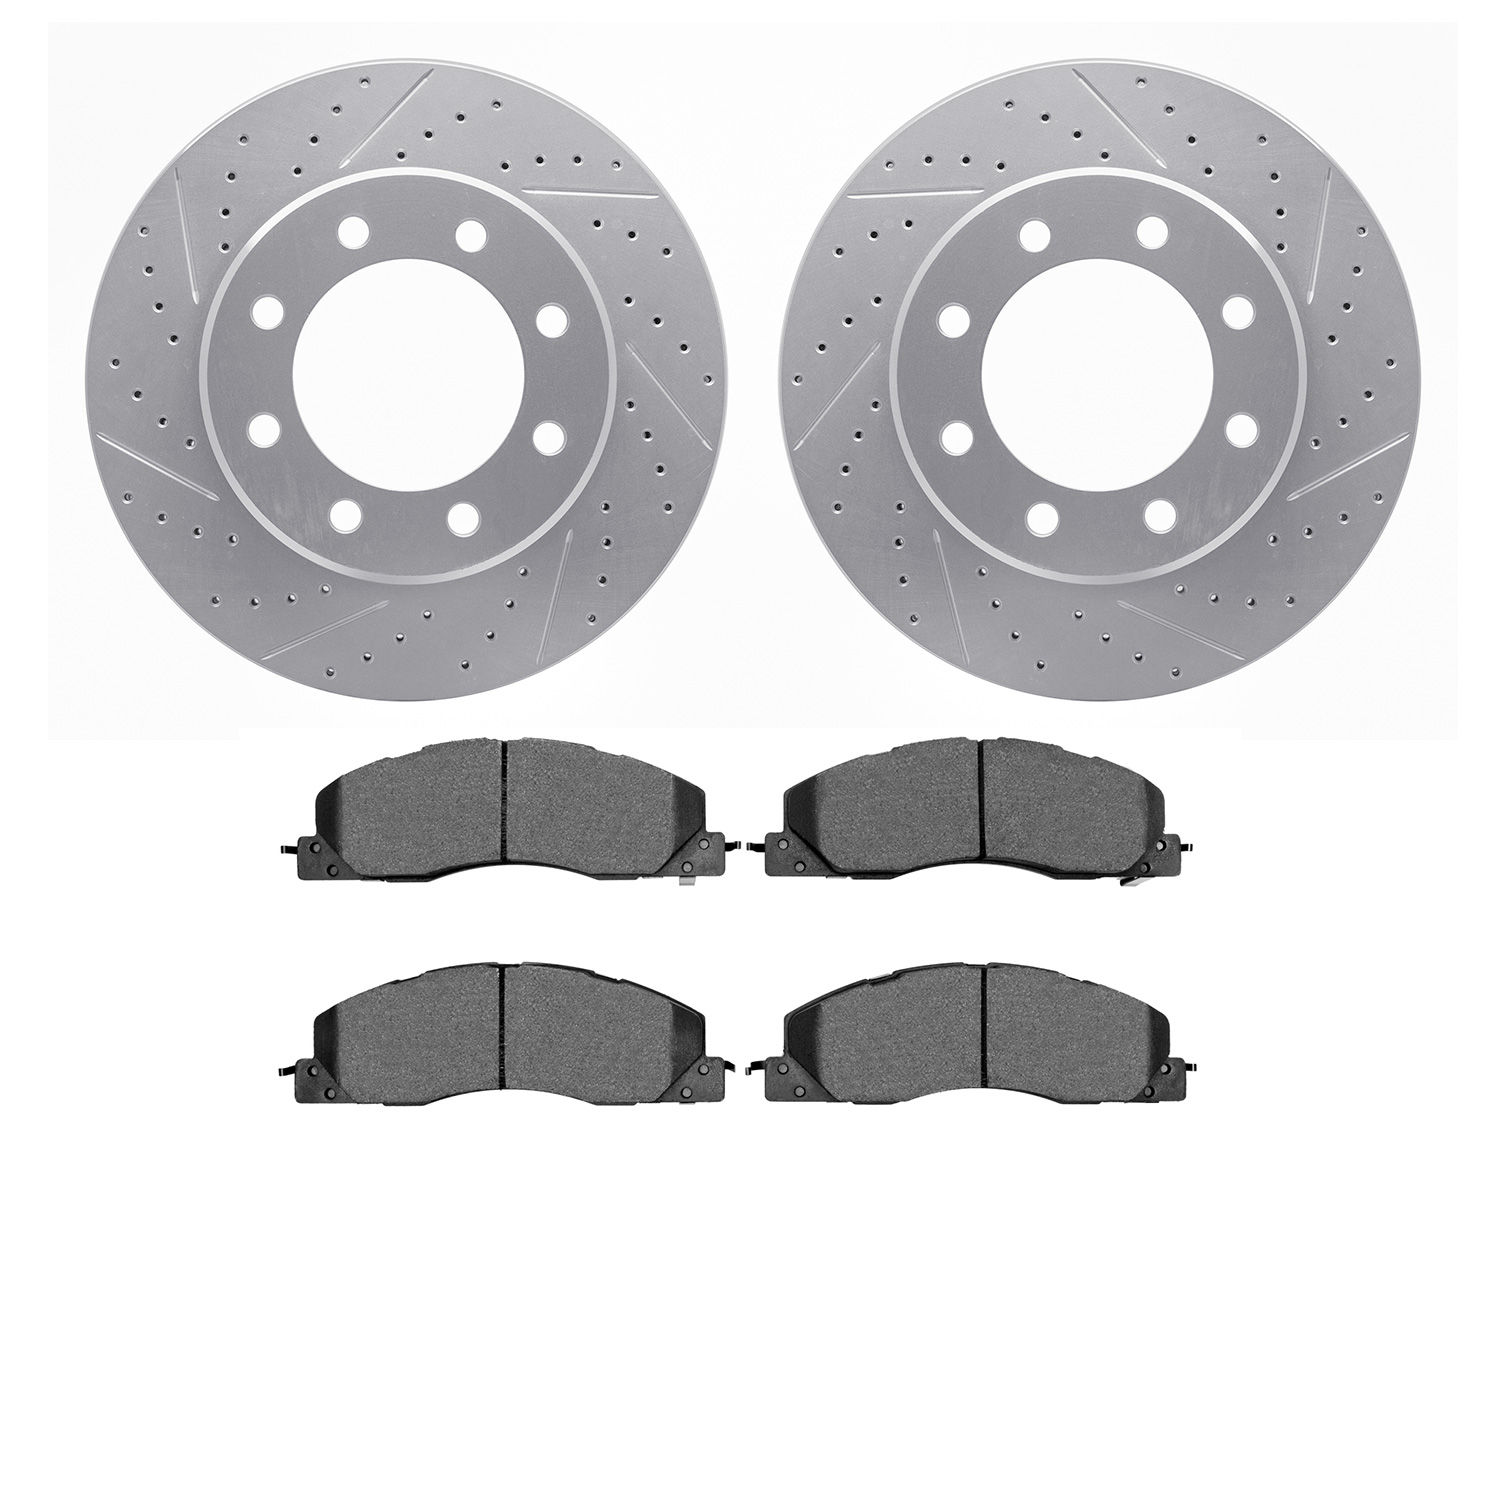 2202-40074 Geoperformance Drilled/Slotted Rotors w/Heavy-Duty Pads Kit, 2009-2018 Mopar, Position: Front